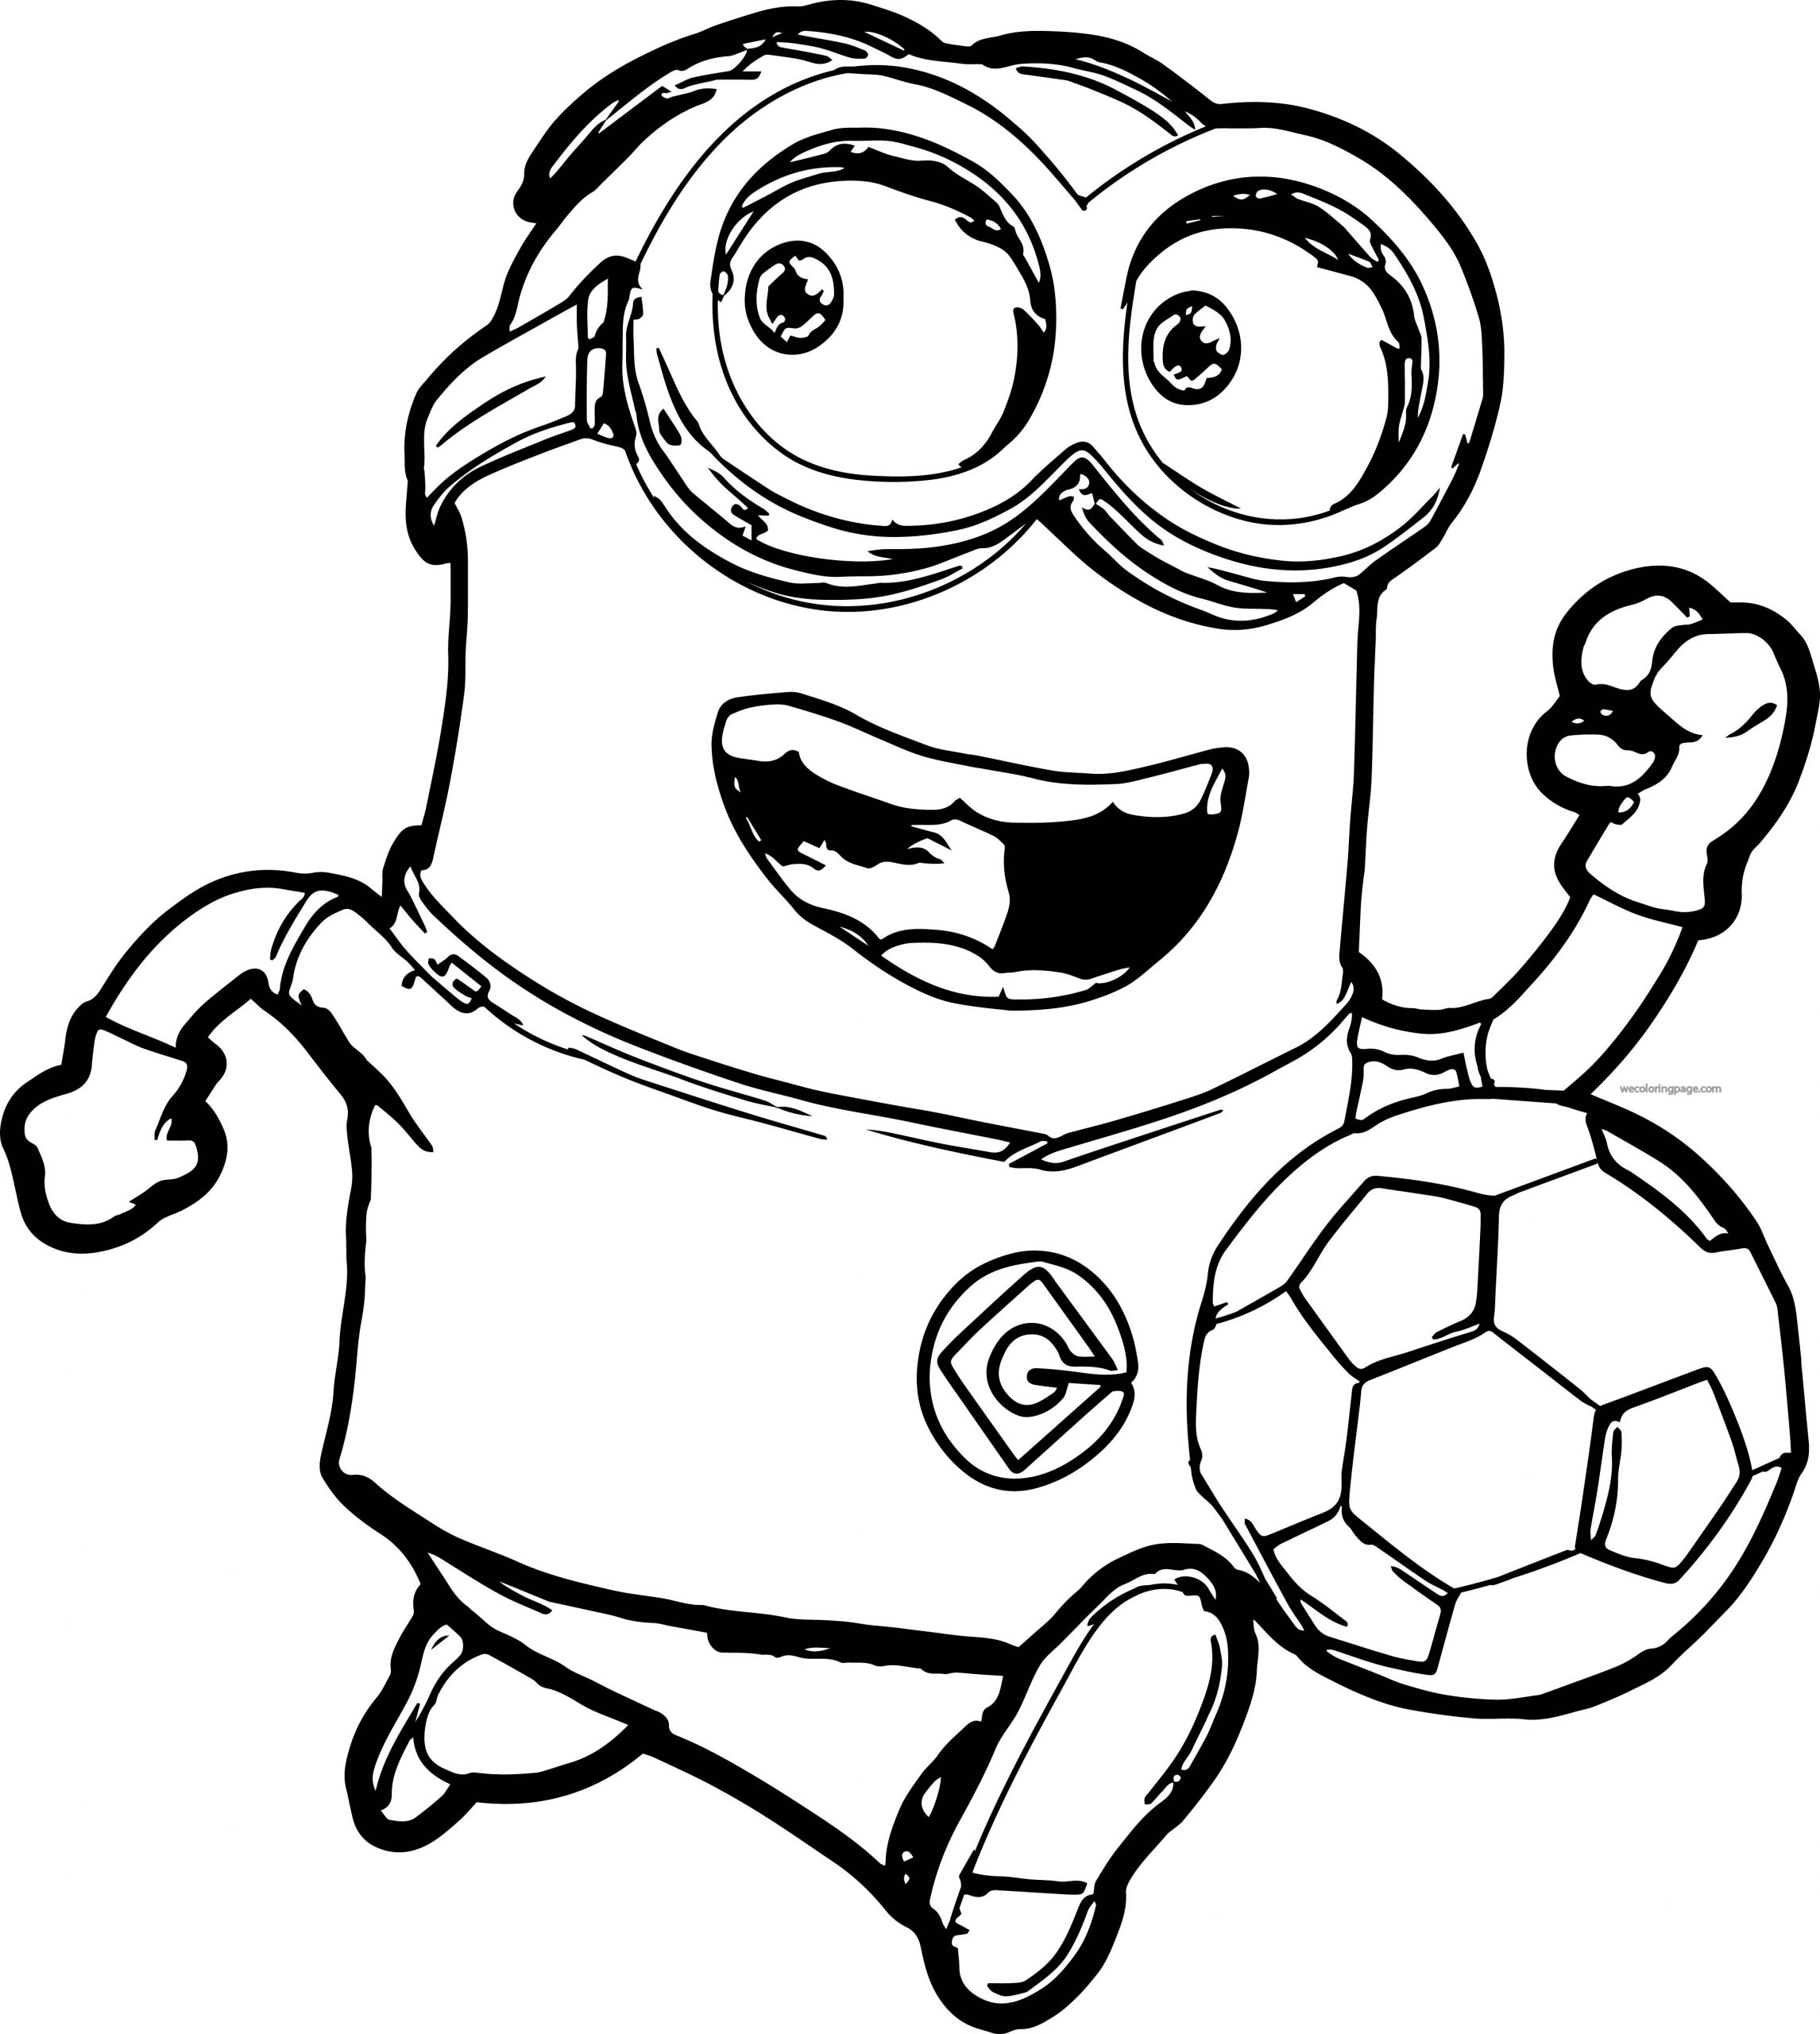 Coloring Pages For Kids Printable
 Minion Coloring Pages Best Coloring Pages For Kids